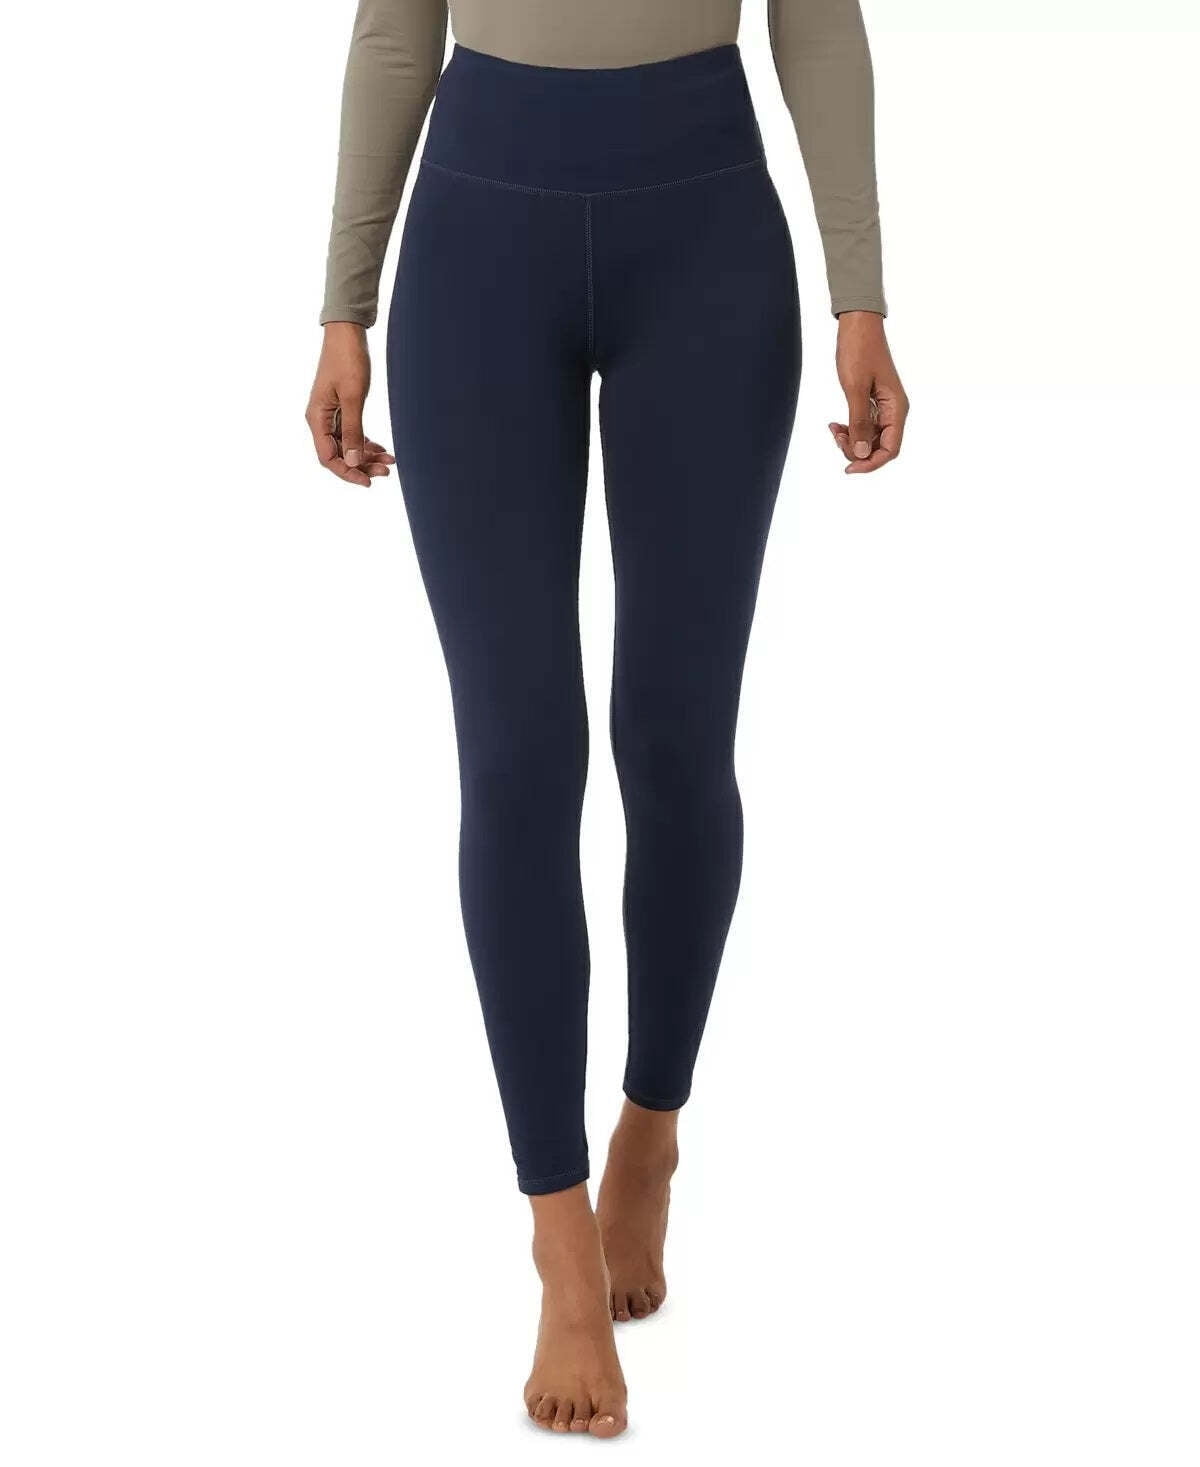 wendunide leggings for women Women Brushed Stretch Lined Thick